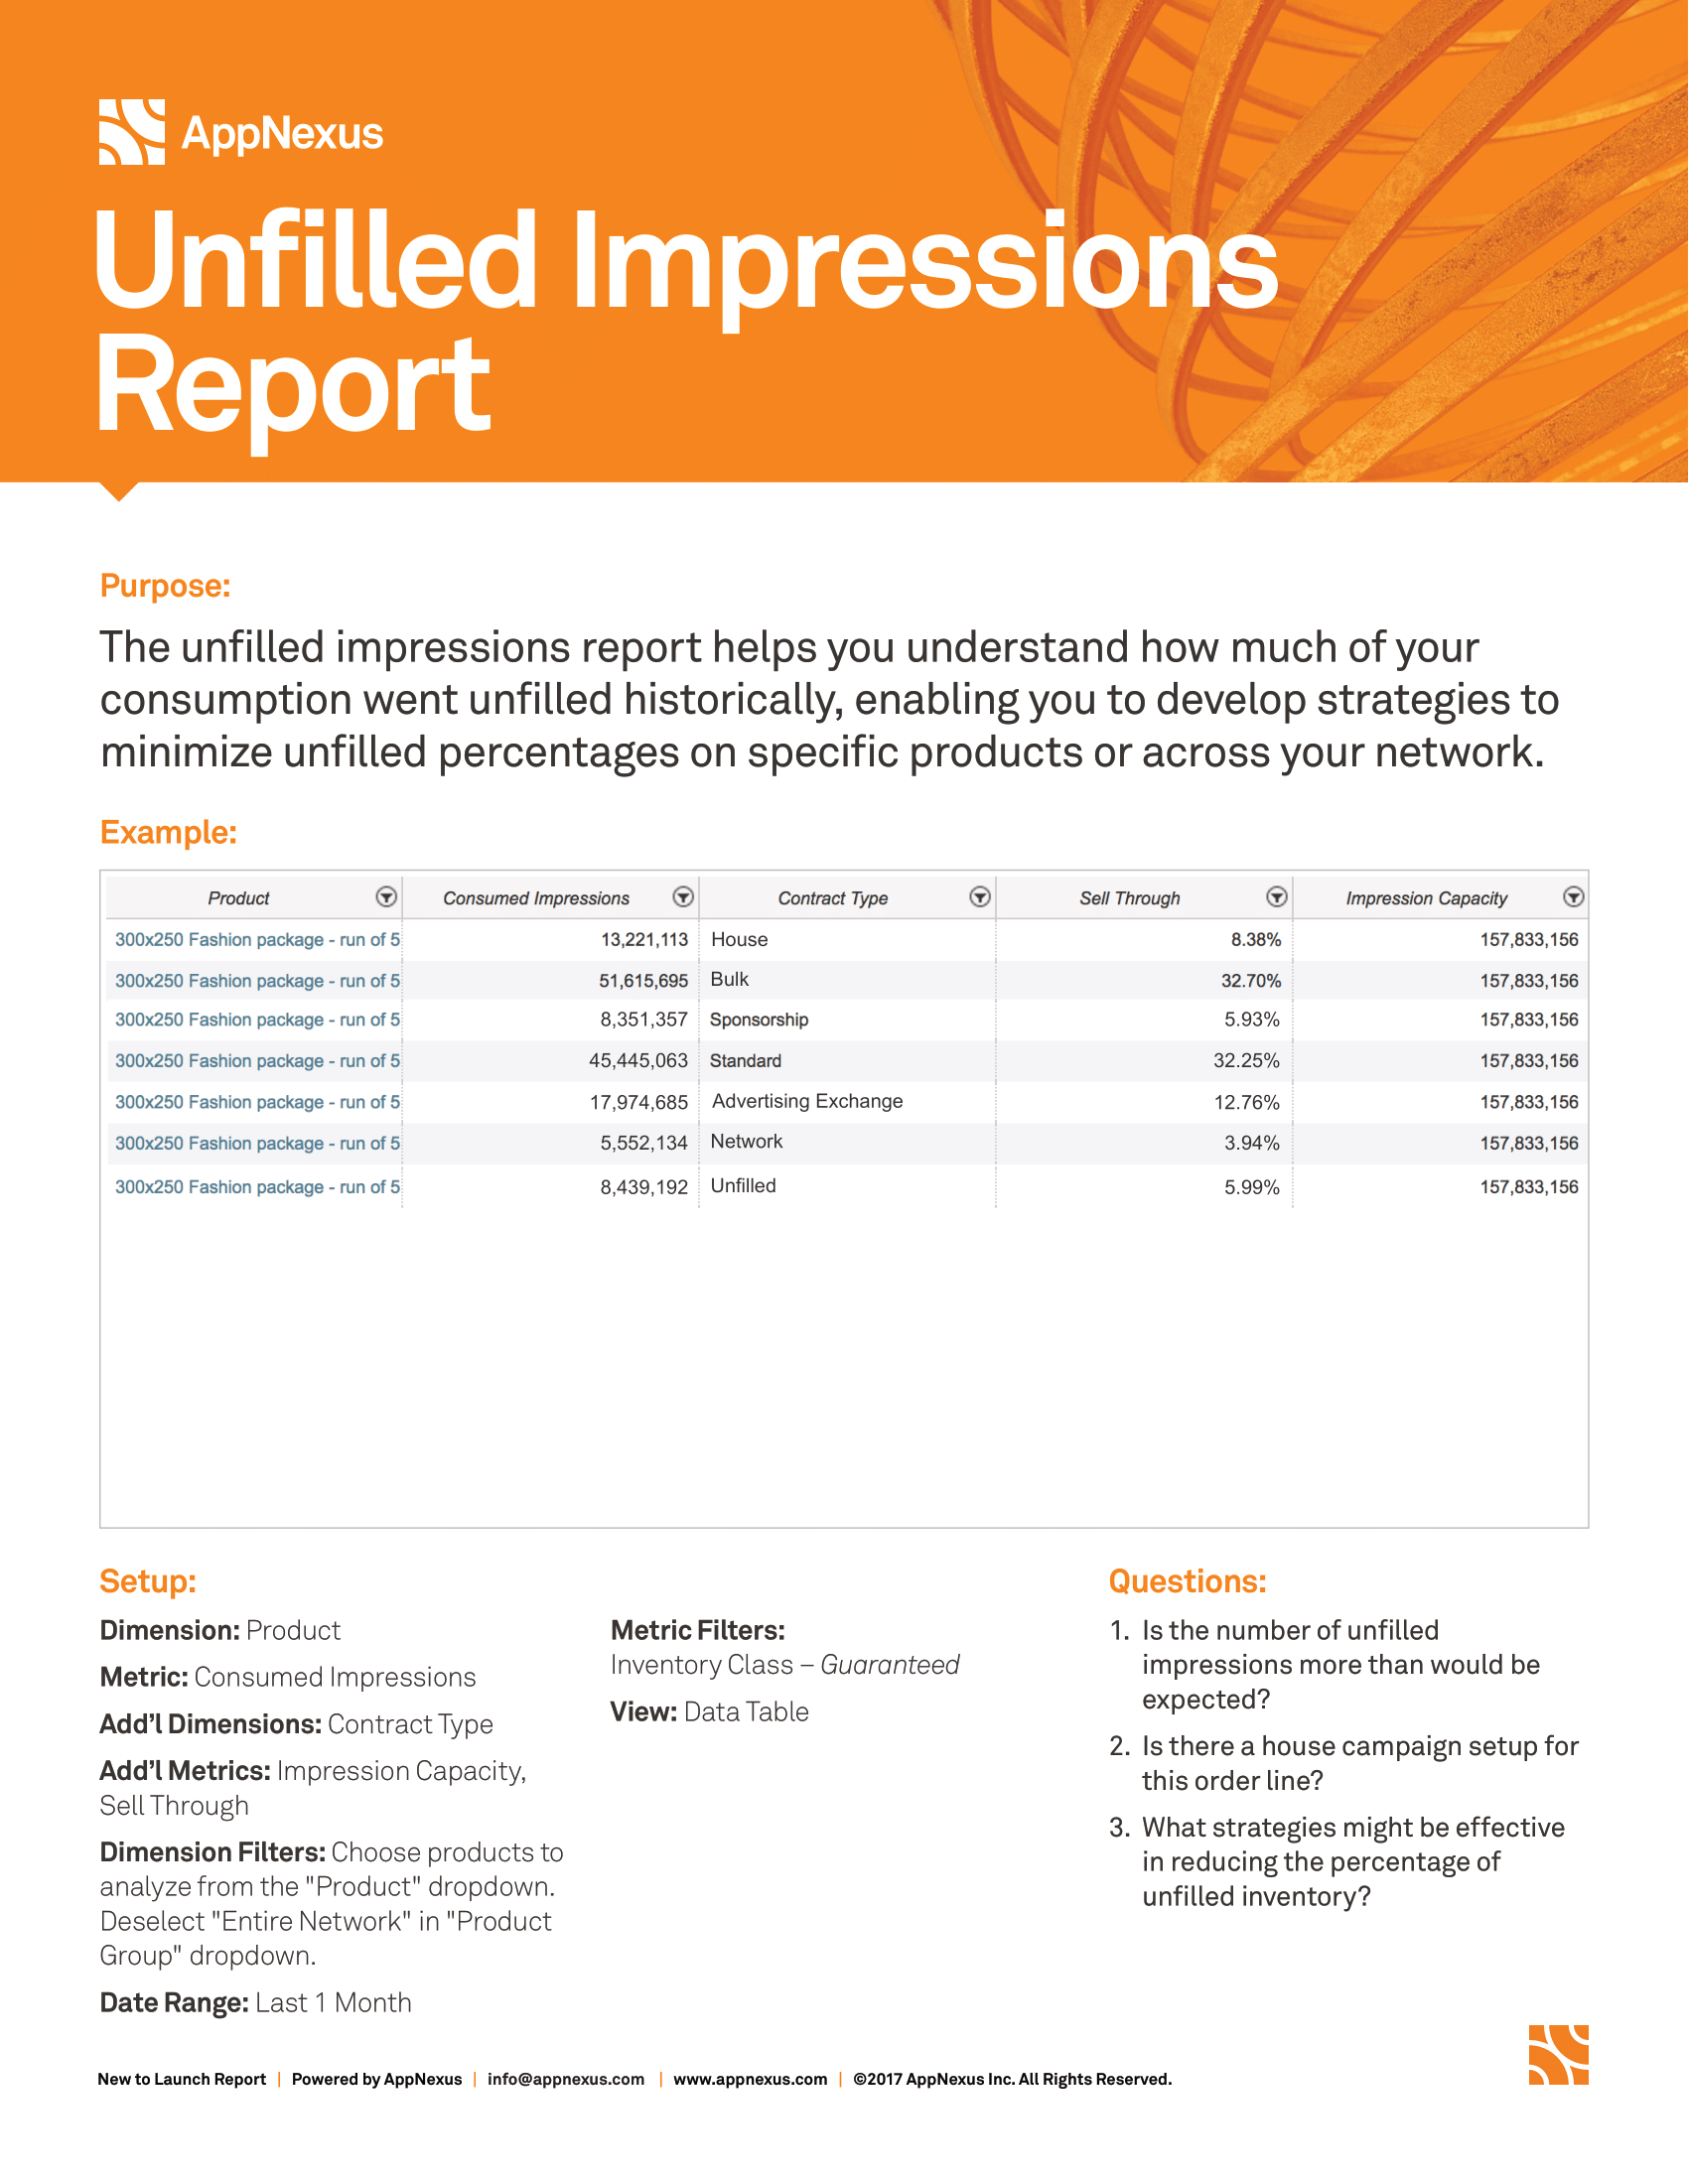 Screenshot that provides details about the Unfilled Impressions report.